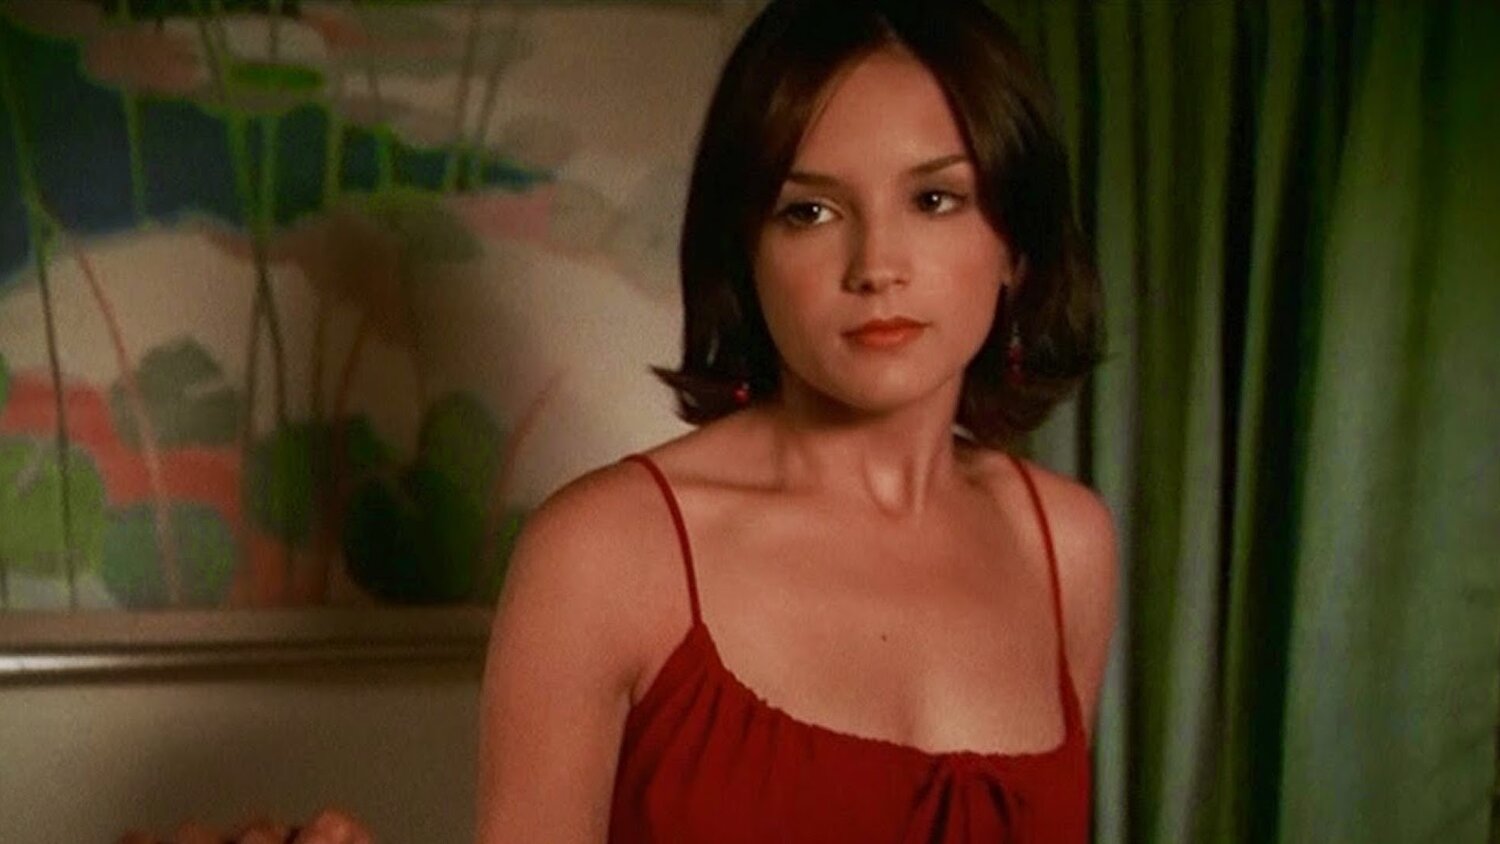 She s french. Рэйчел ли Кук 1999. Rachael Leigh Cook 1999. Рэйчел ли Кук 1998.